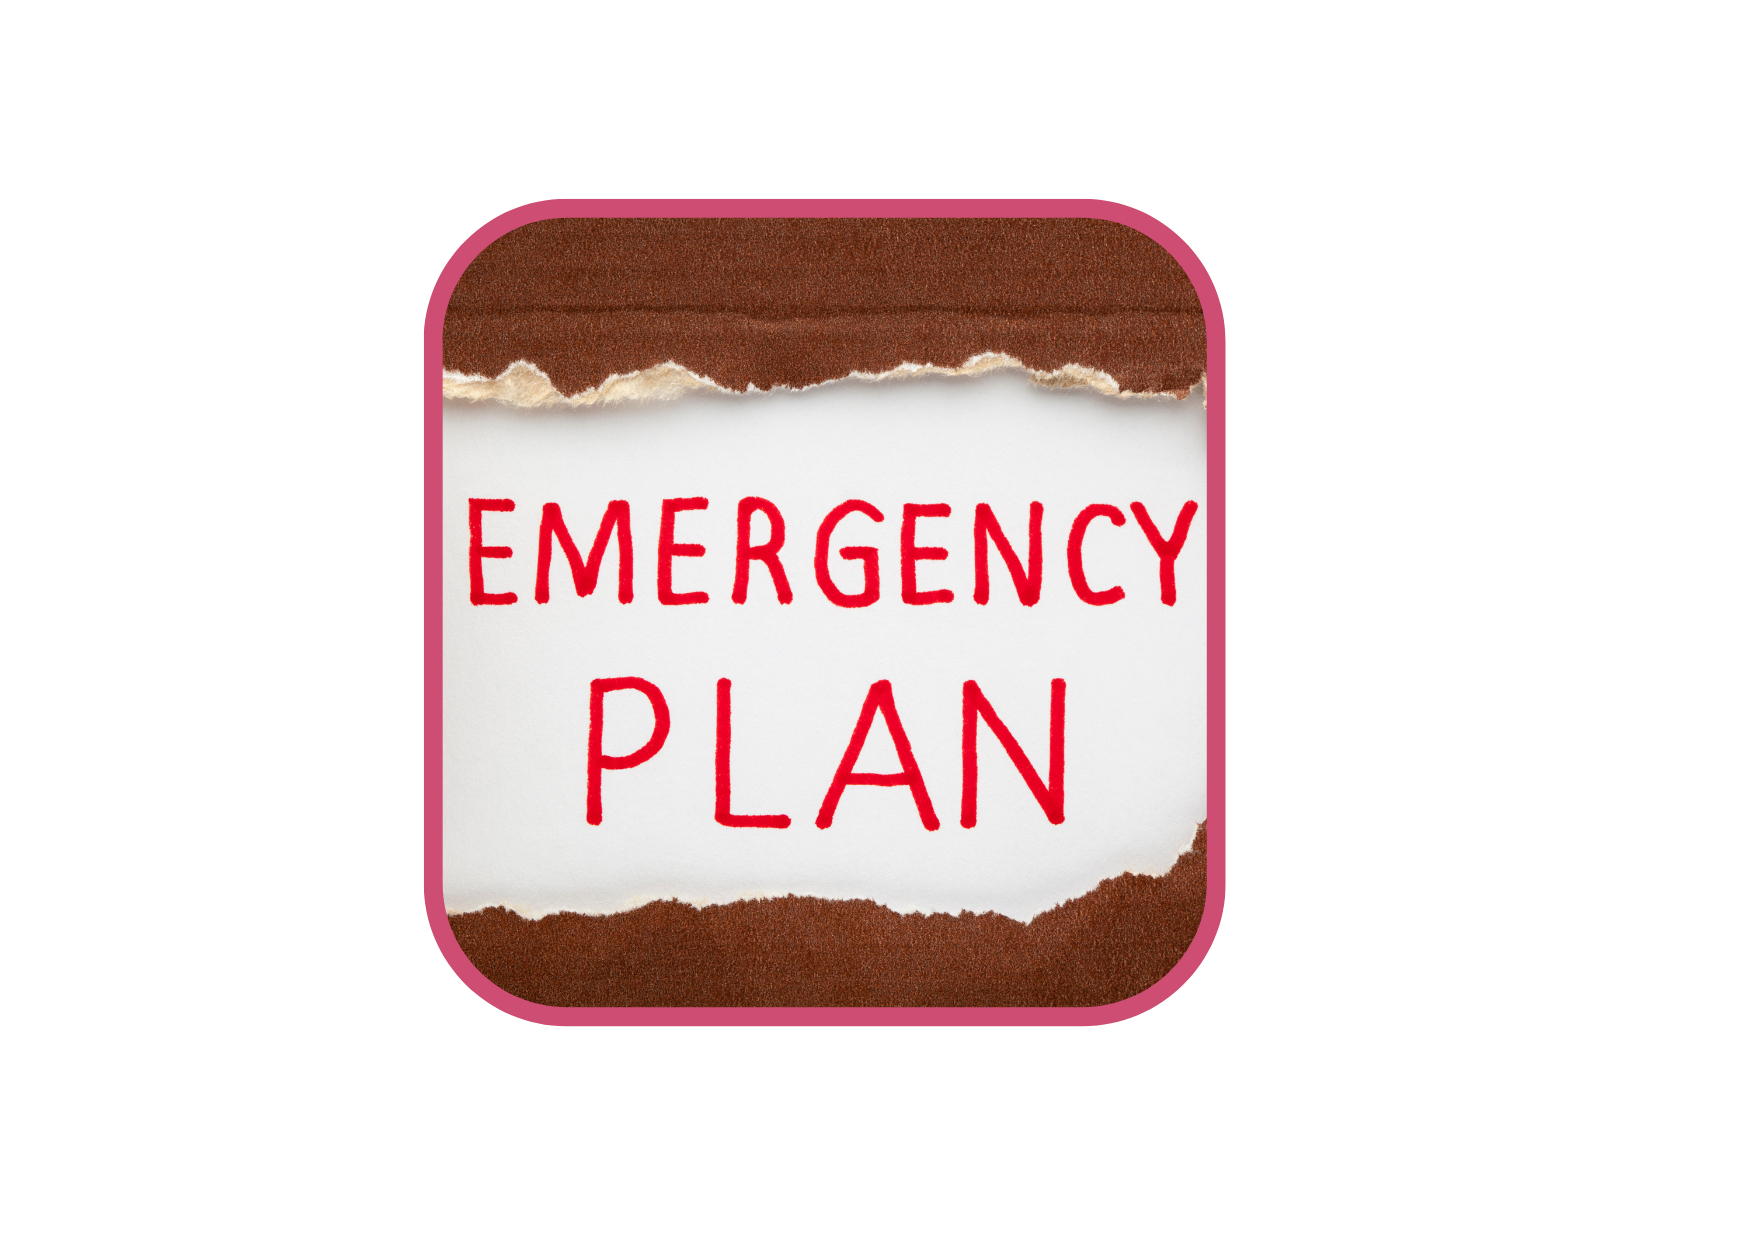 The words Emergency Plan in red on a white background